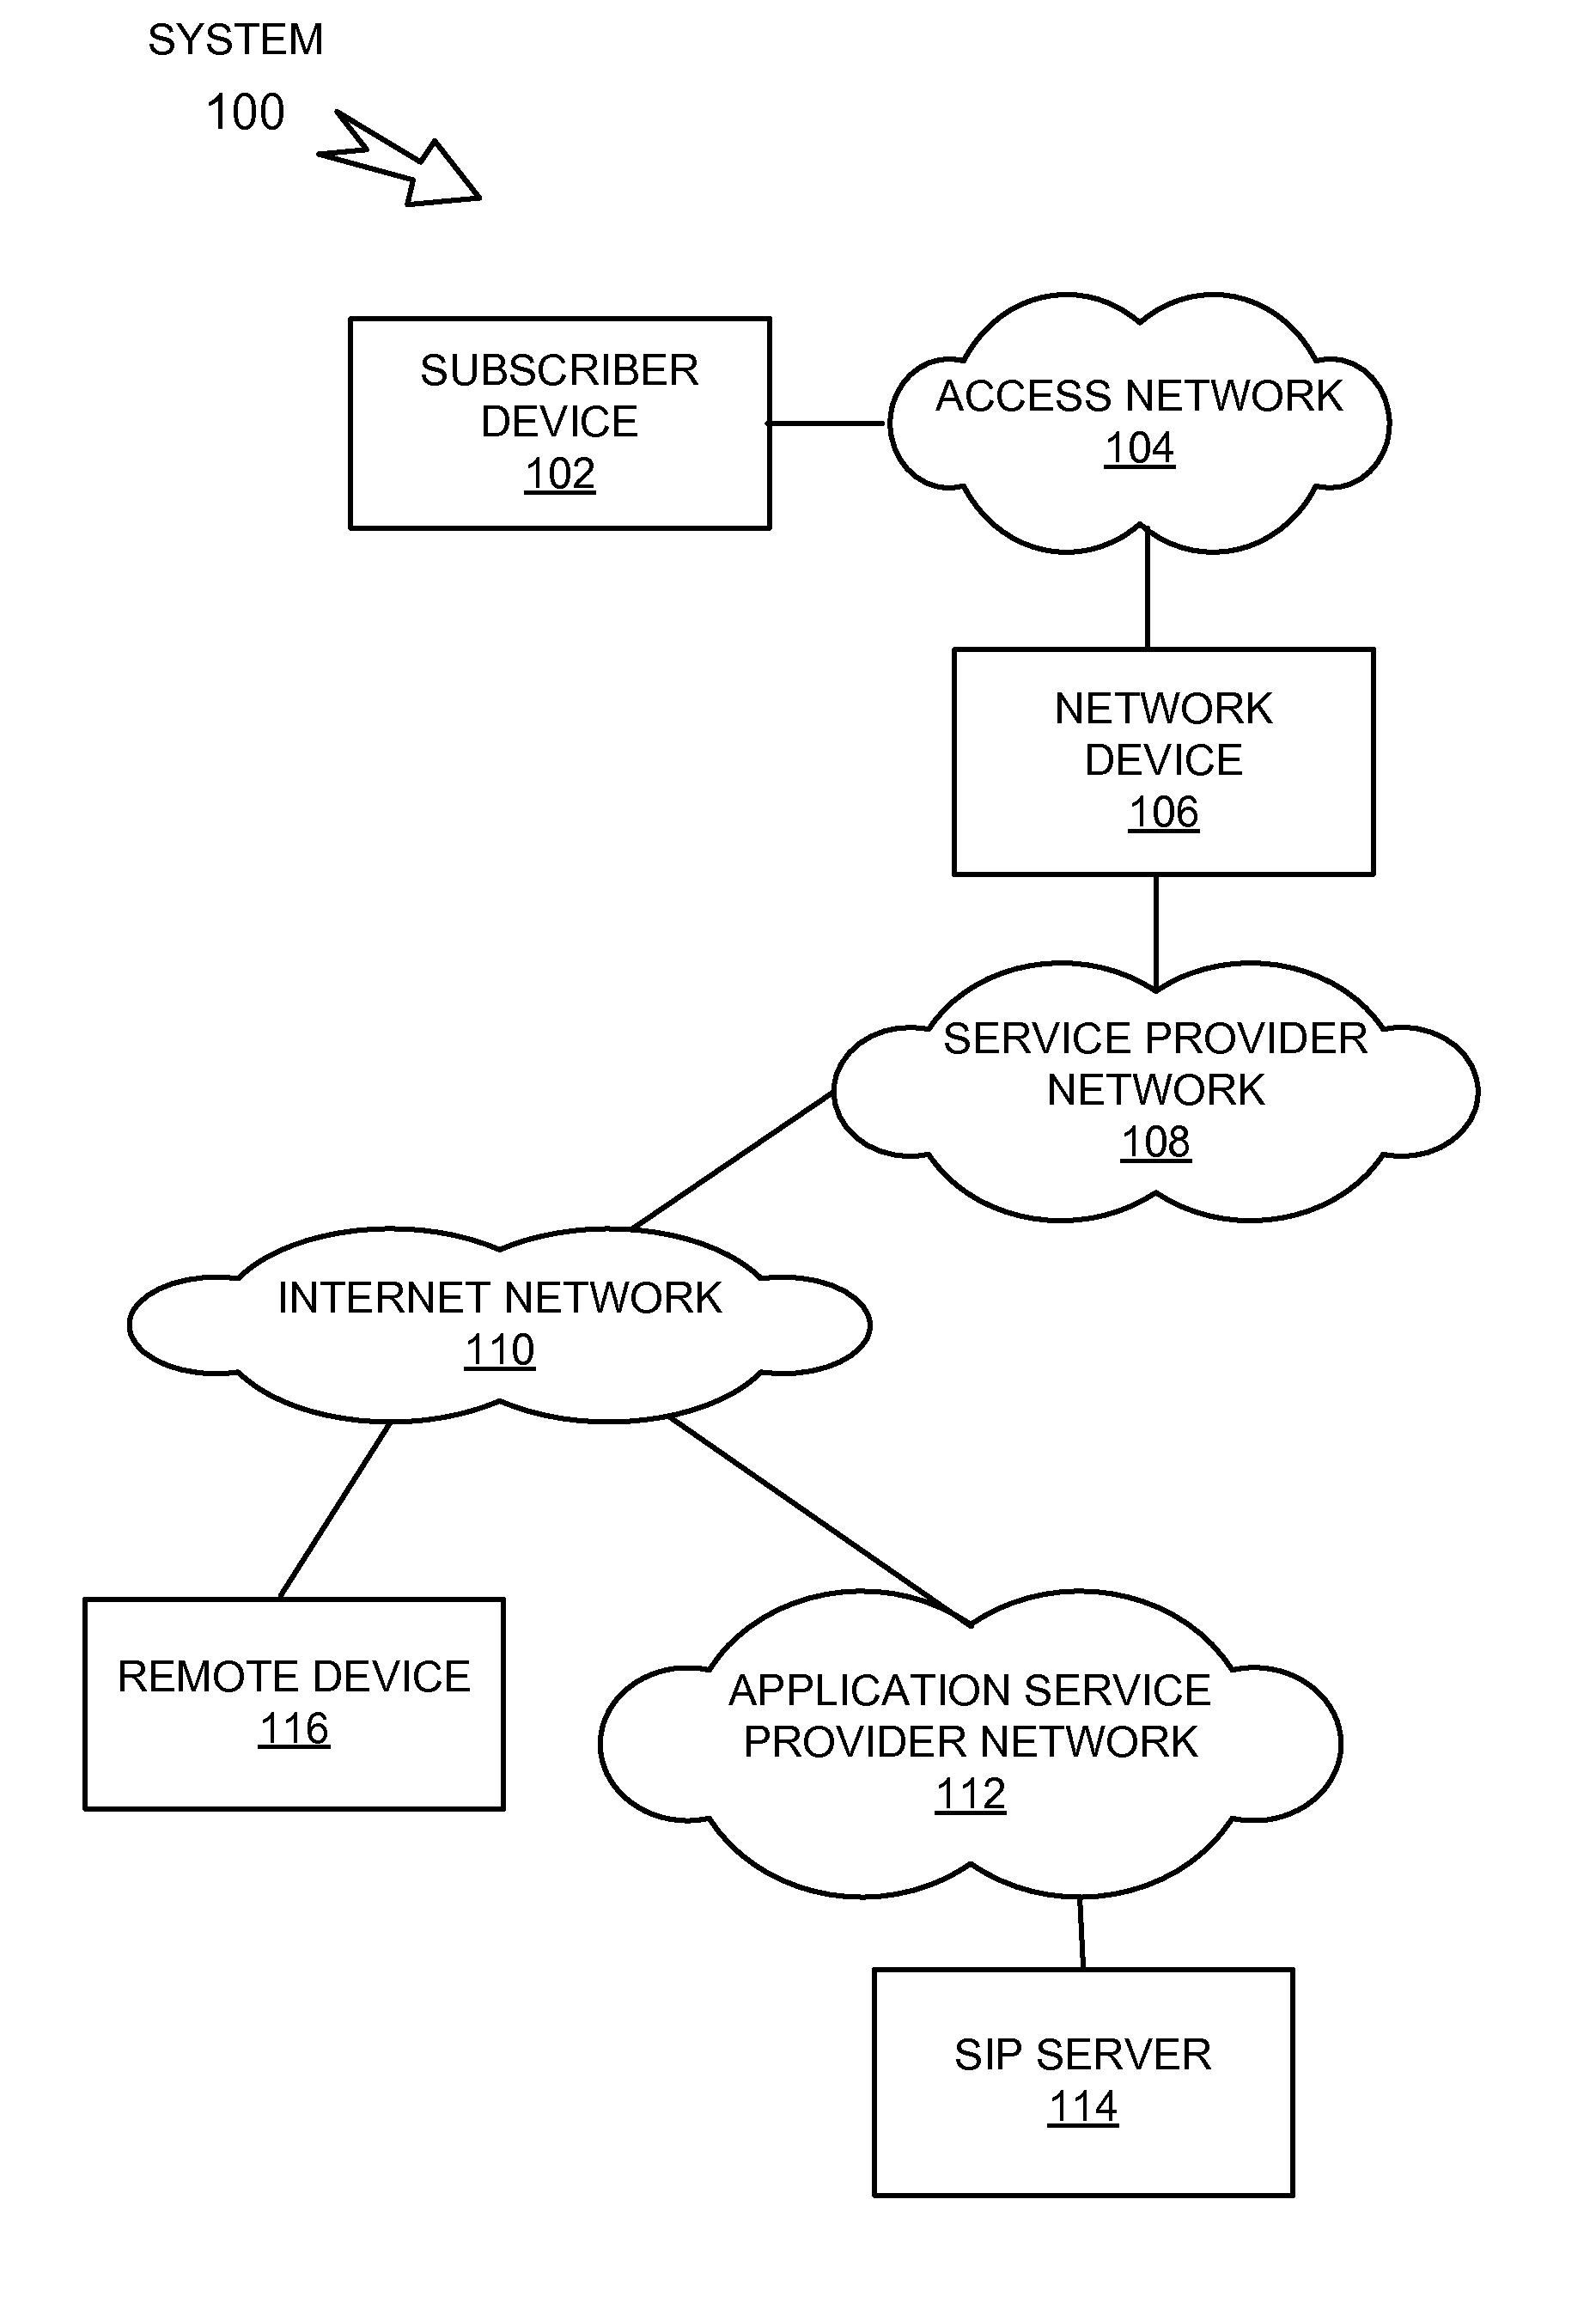 Monitoring datagrams in a data network